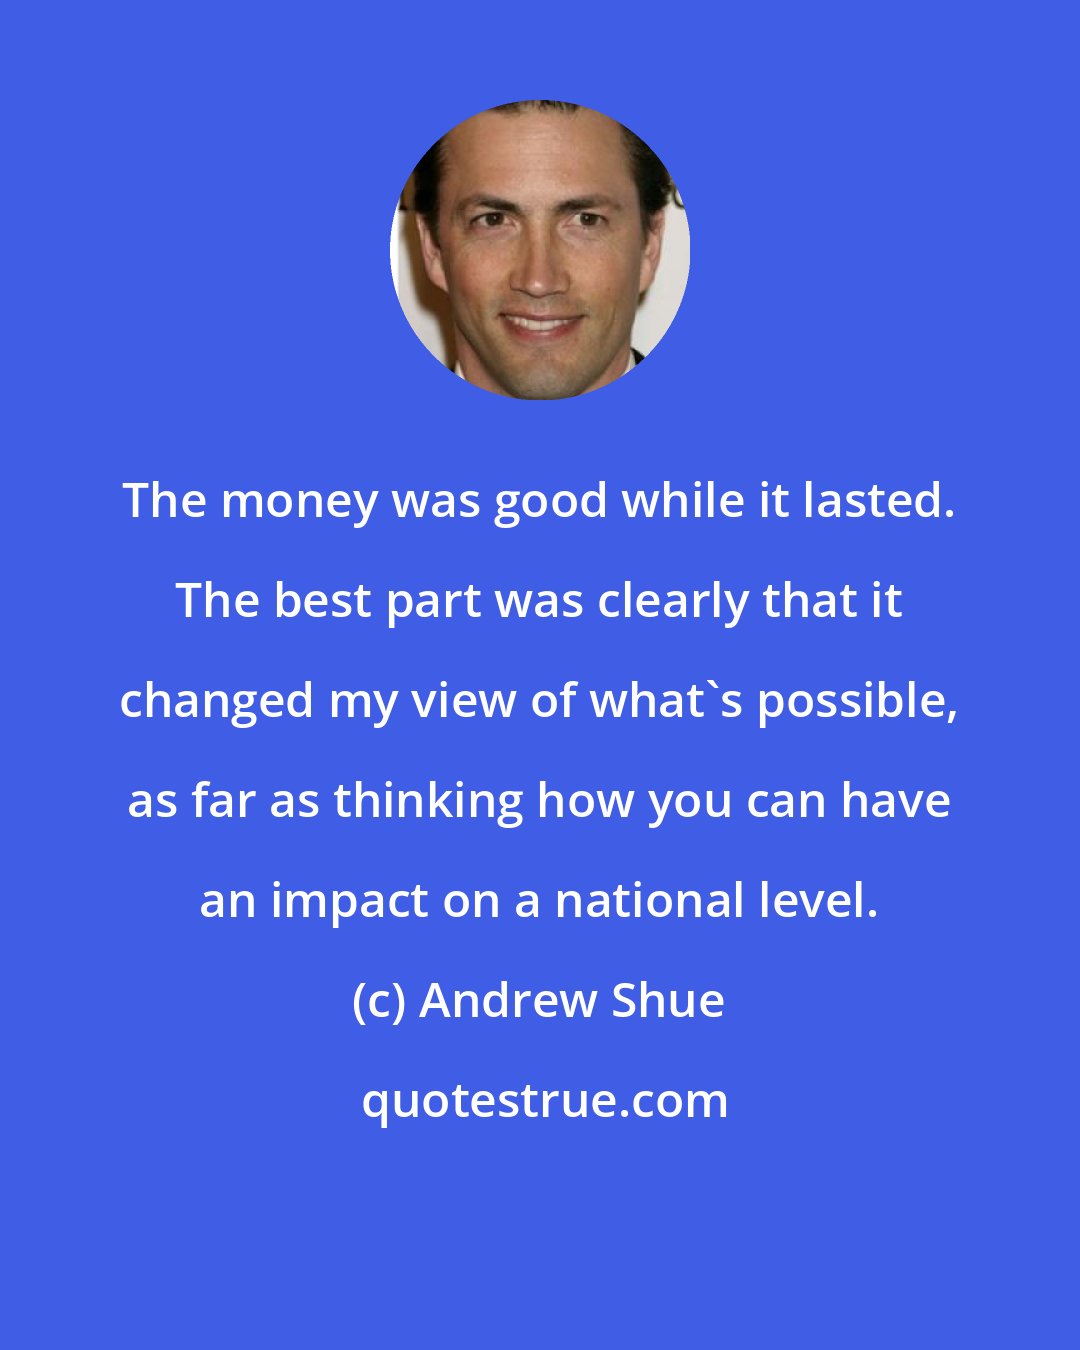 Andrew Shue: The money was good while it lasted. The best part was clearly that it changed my view of what's possible, as far as thinking how you can have an impact on a national level.